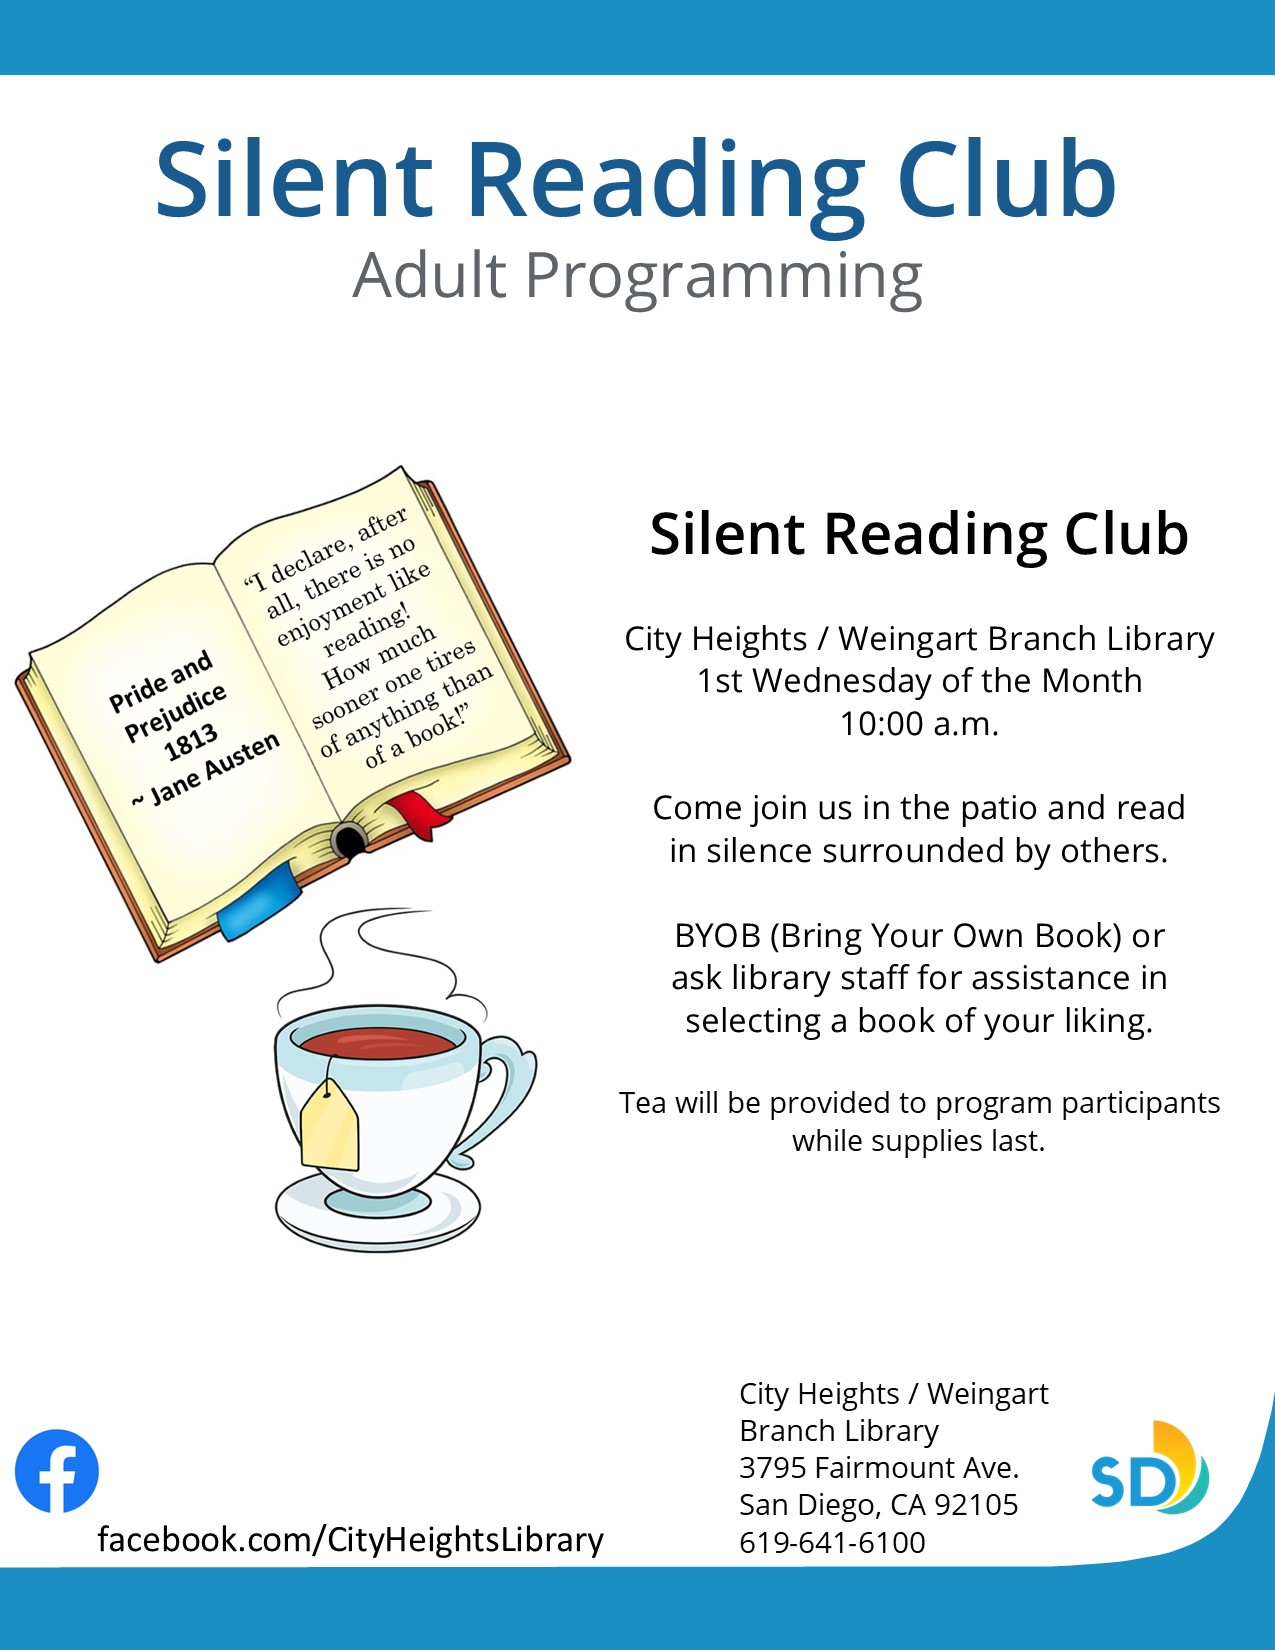 The City Heights / Weingart Branch Library Presents:  Silent Reading Club  1st Wednesday of the Month at 10 a.m.  Do you love reading, but don’t like the pressure of assigned reading or other standards associated with book clubs?  Come join us and read in silence surrounded by others.  BYOB (Bring Your Own Book) or ask library staff for assistance in selecting a book of your liking.  Tea will be provided to program participants while supplies last.